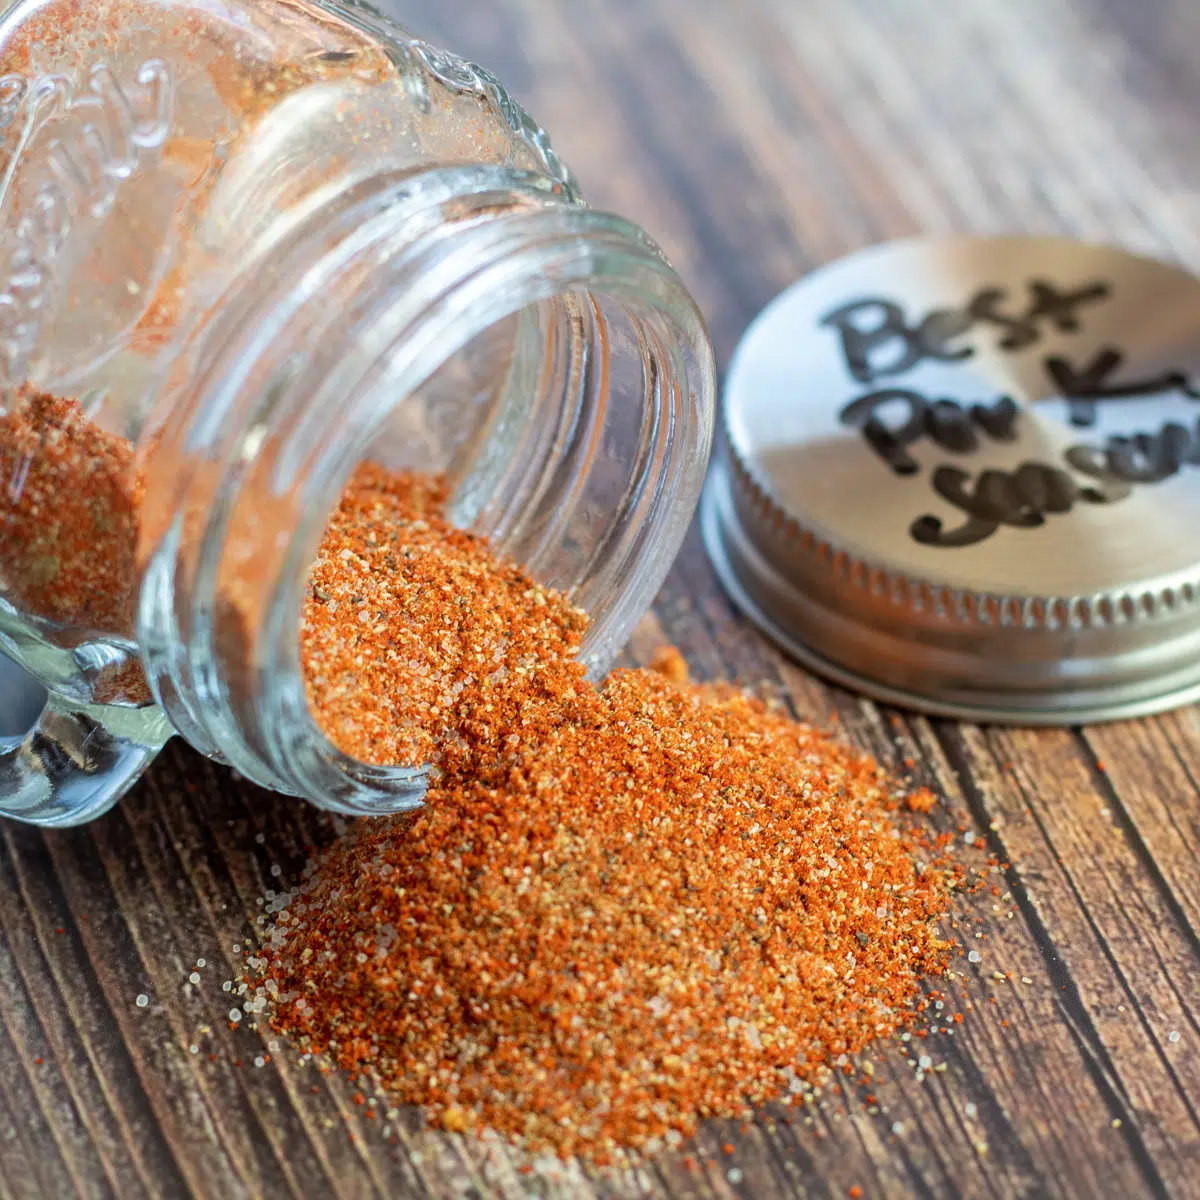 Square image of pork seasoning spilling out of a small glass jar.